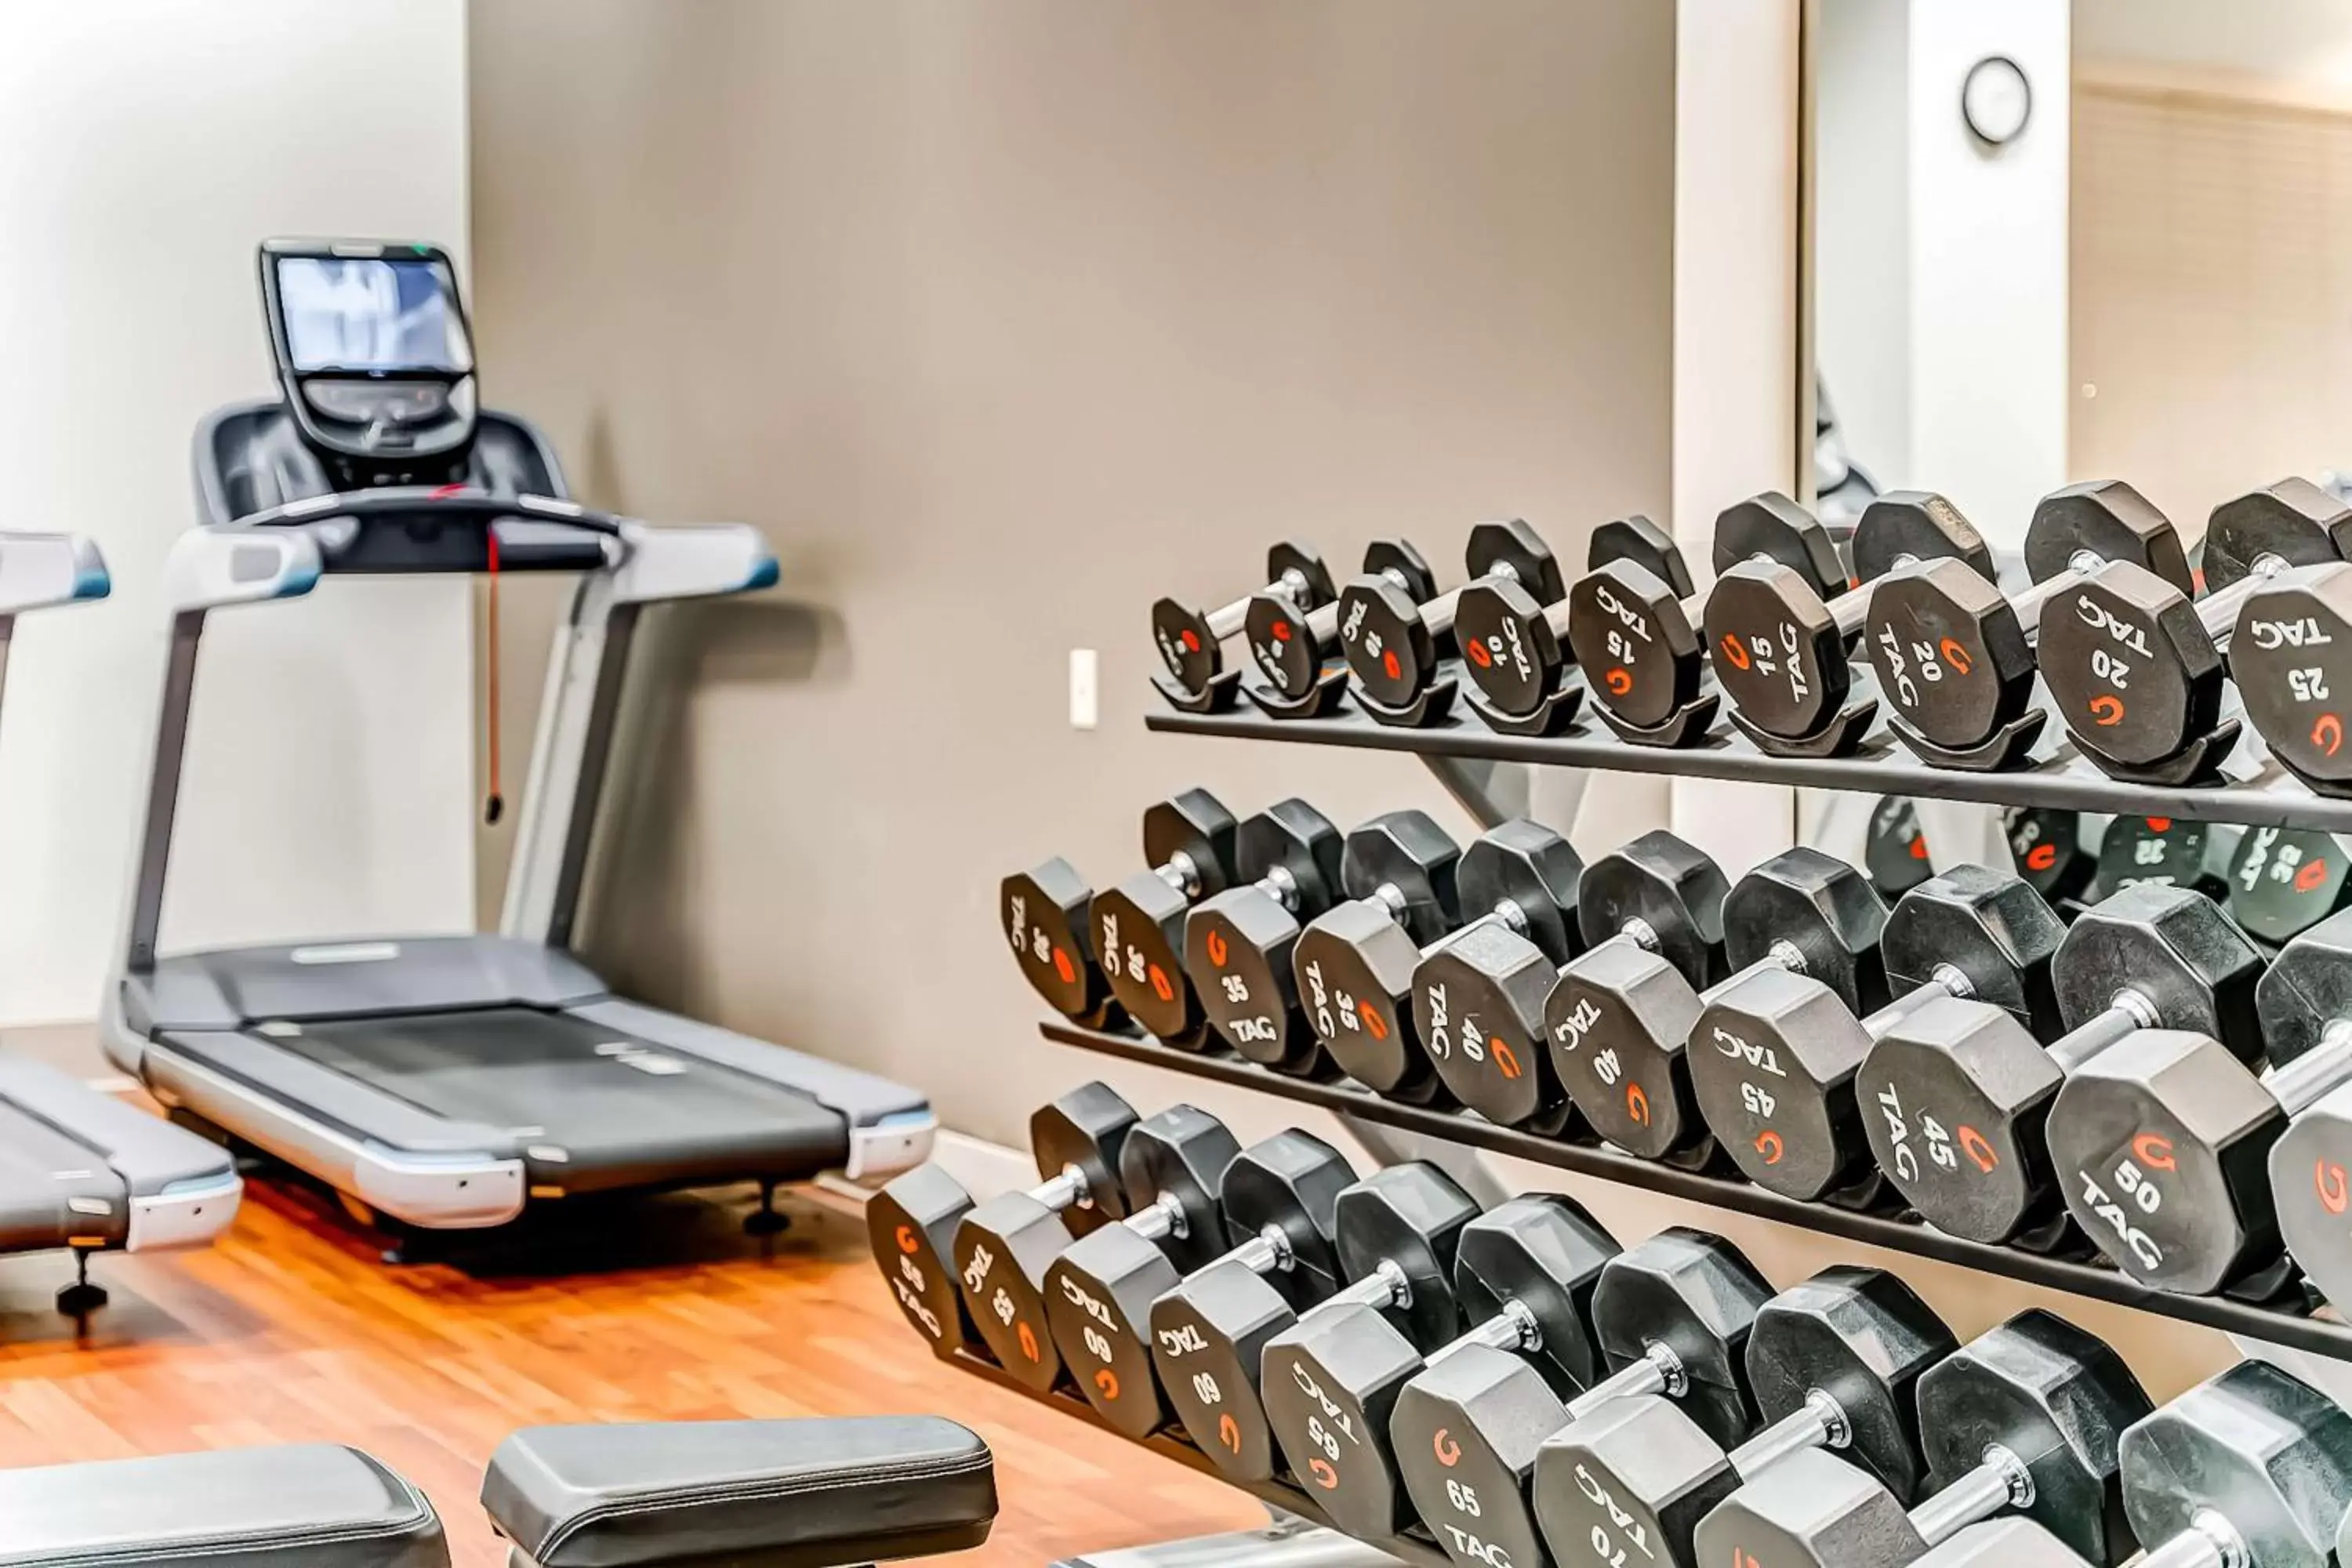 Fitness centre/facilities, Fitness Center/Facilities in Embassy Suites Atlanta - Kennesaw Town Center